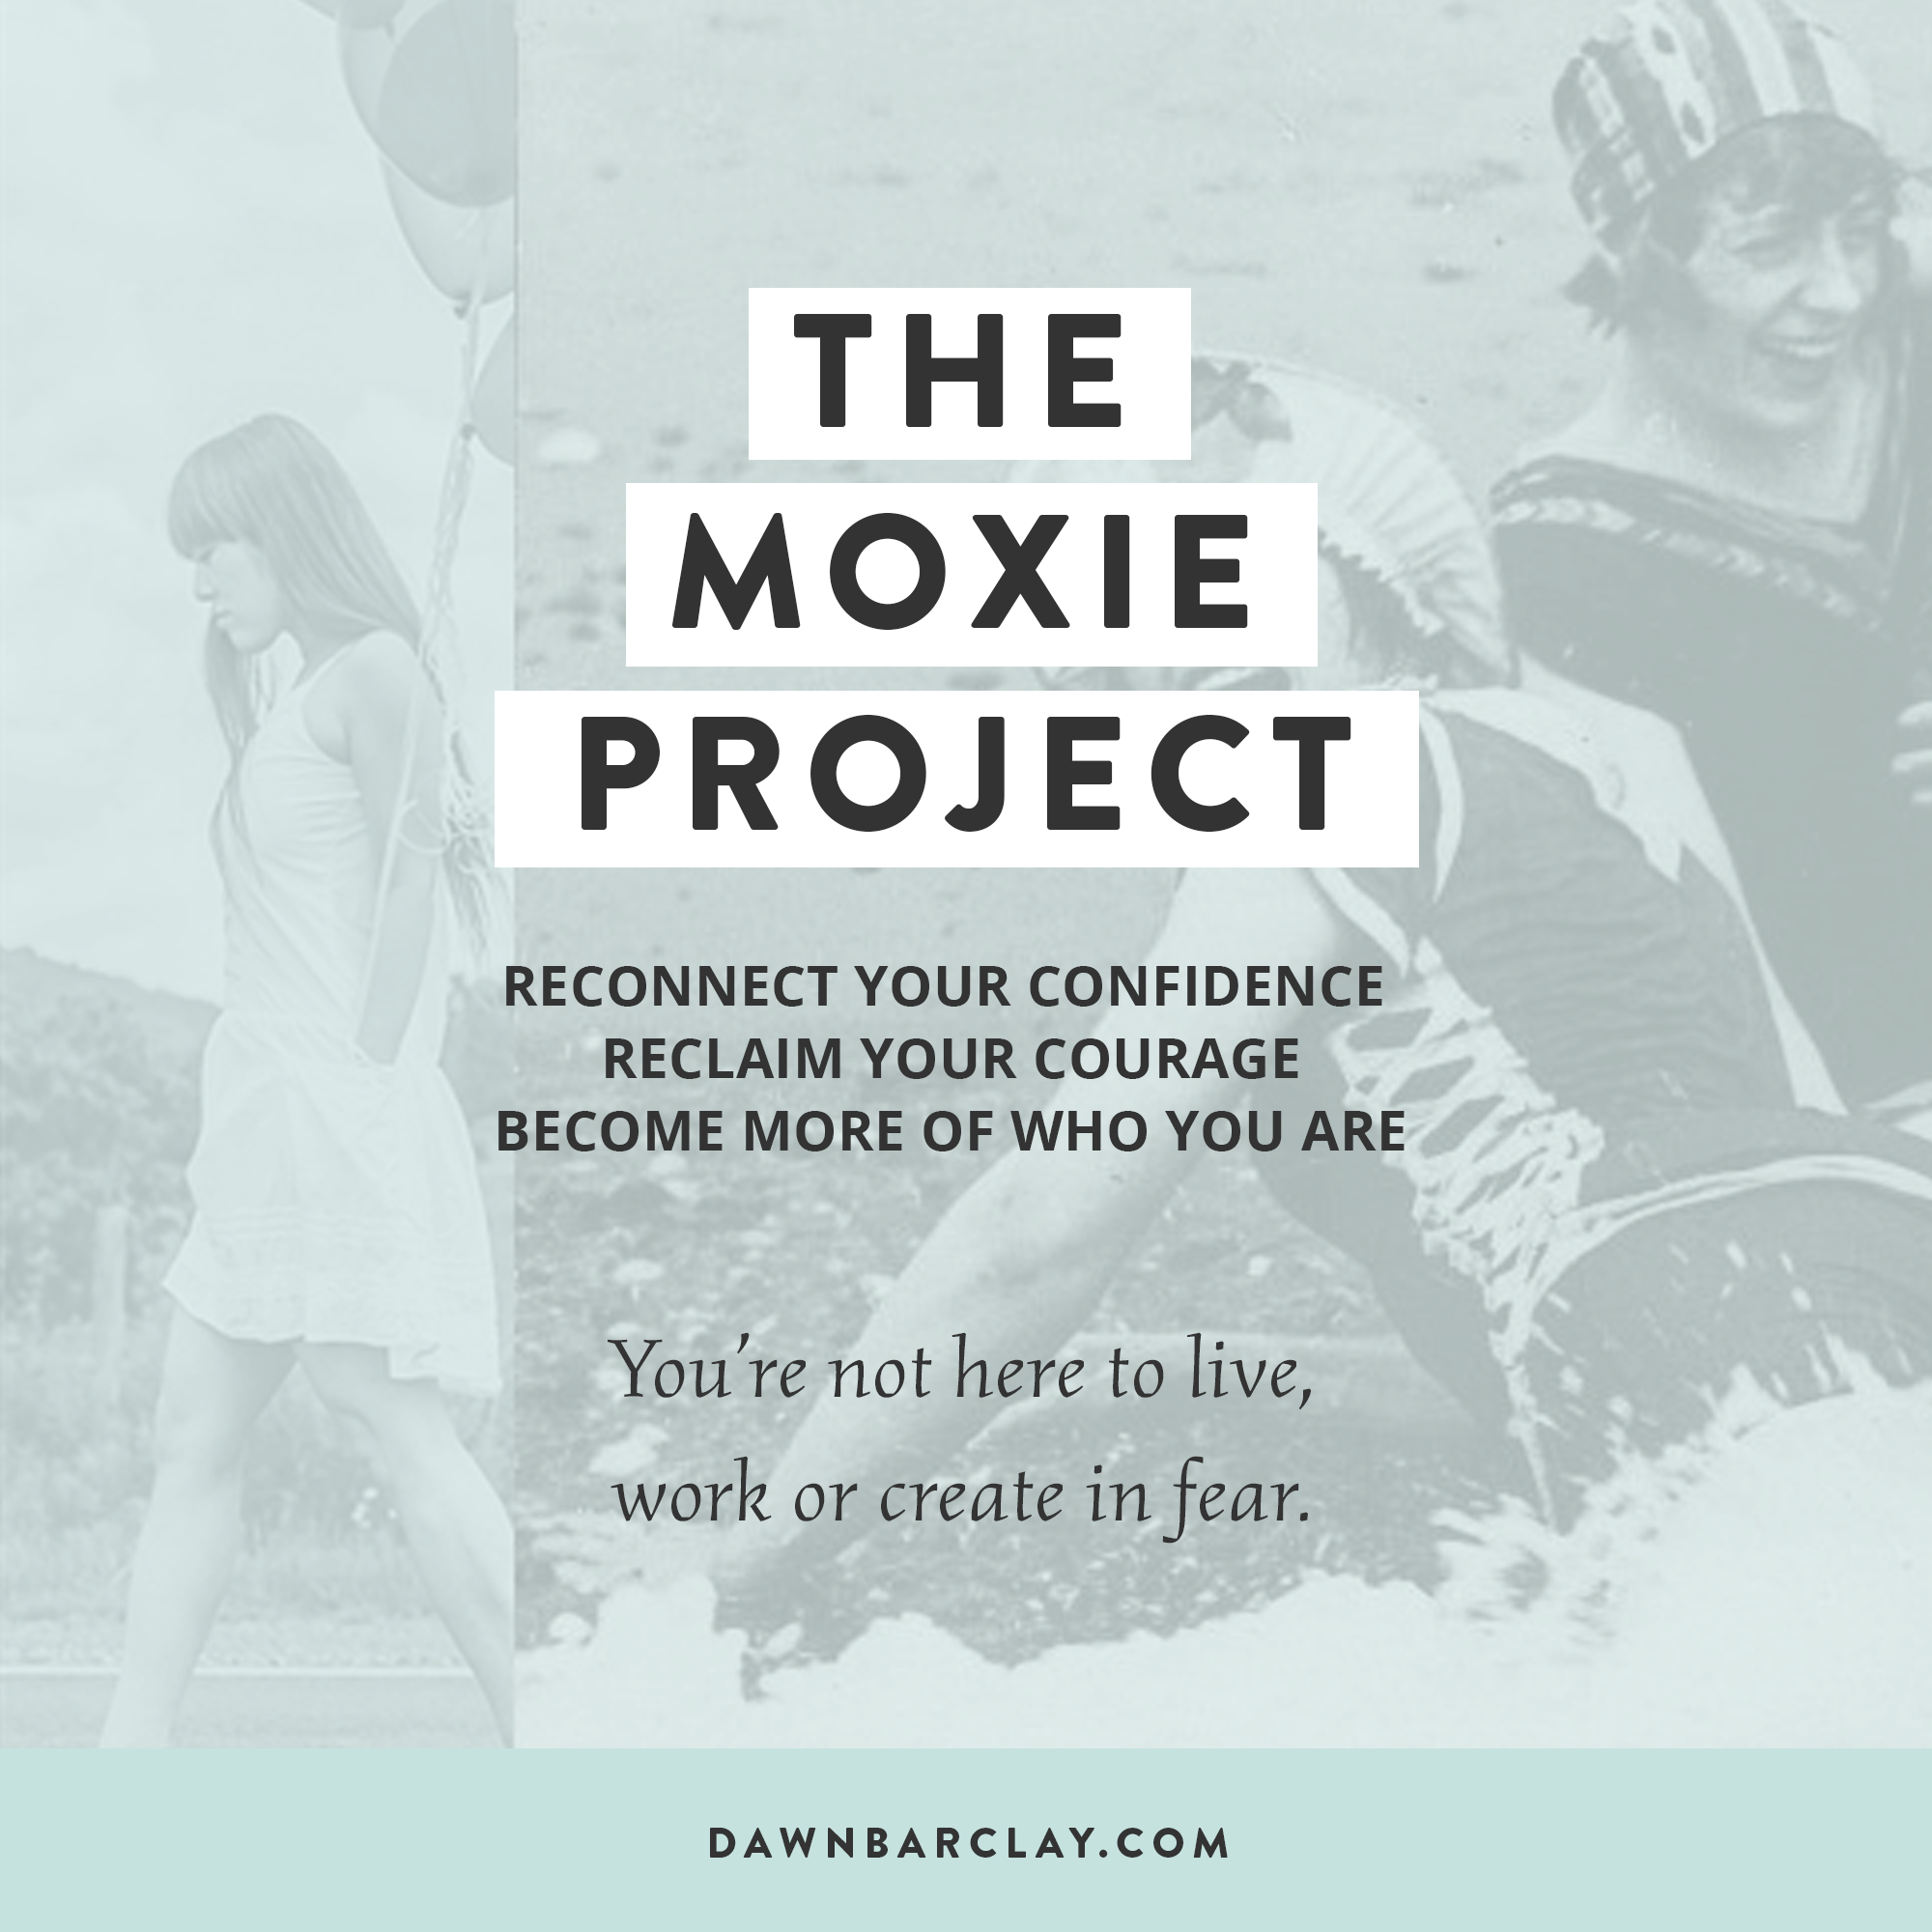 The Moxie Project